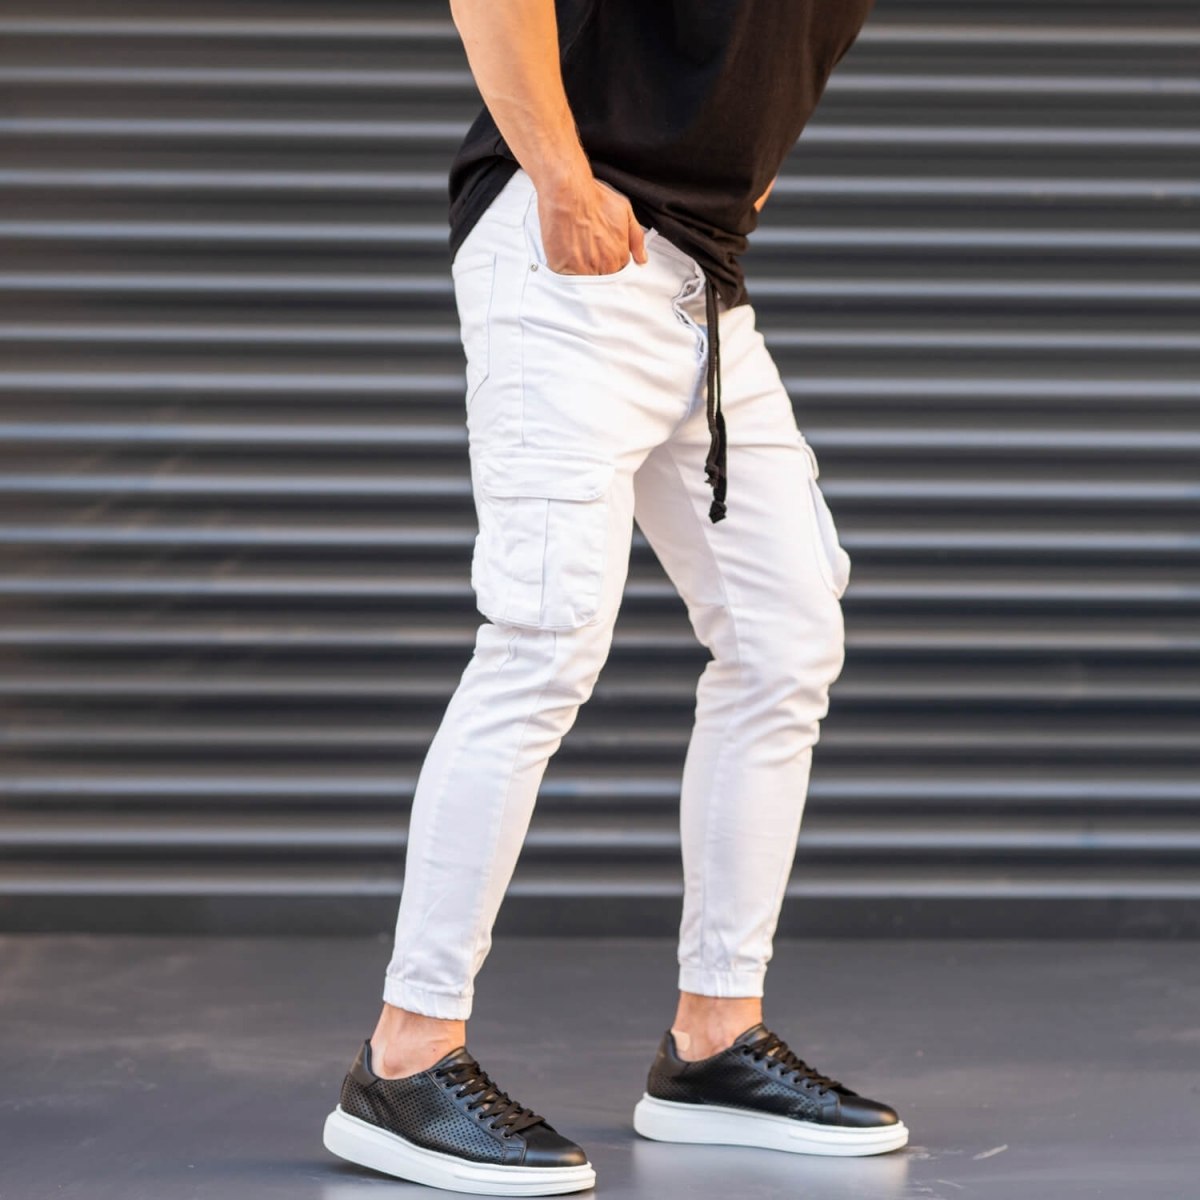 Men's Jeans with Pockets Style in White - 4